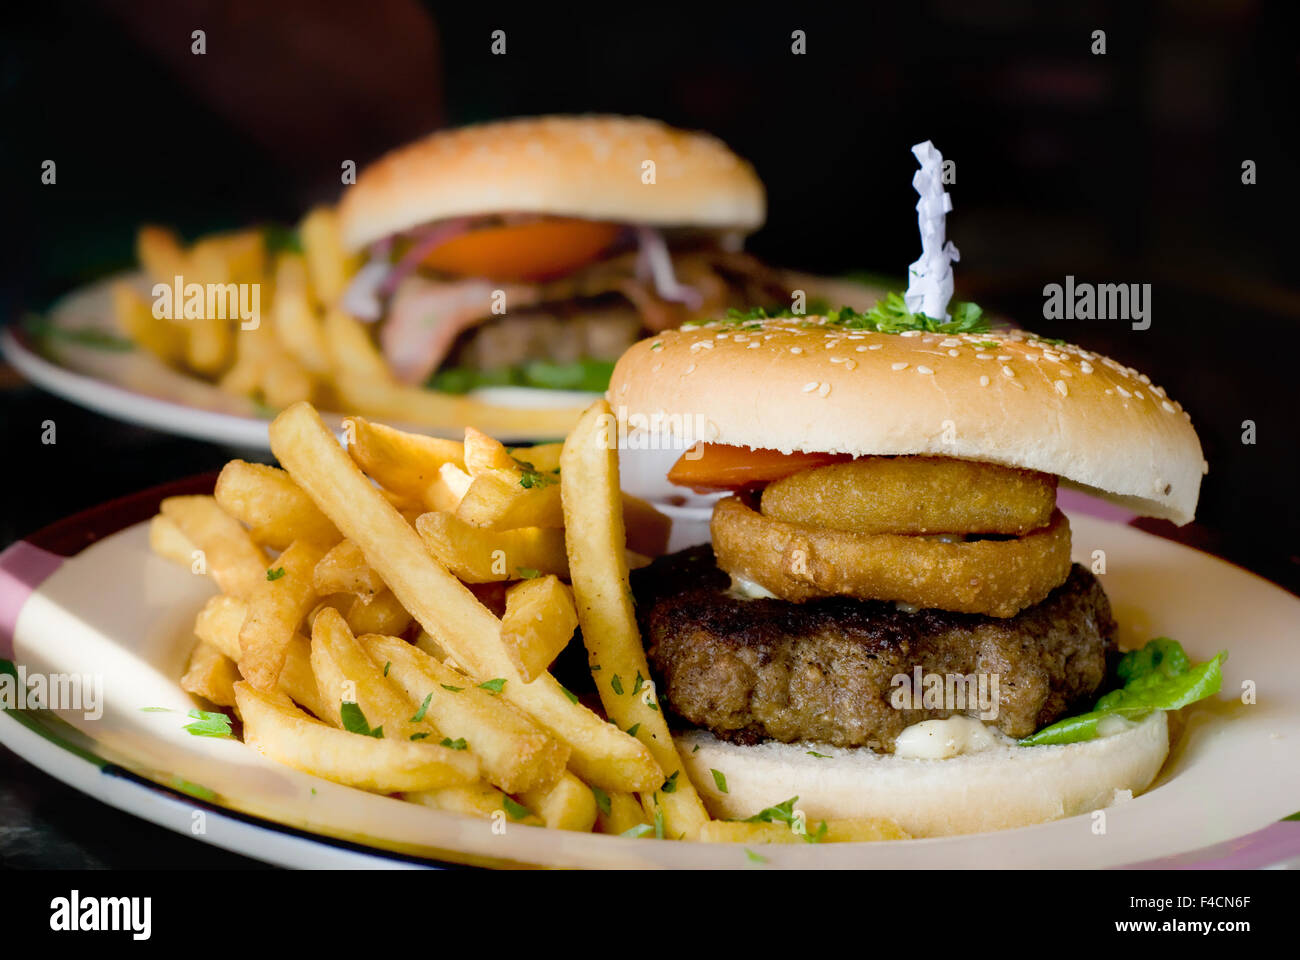 Delicious burger bun  with onion rings,salad, and beefburger,served with fries on a plate. Stock Photo